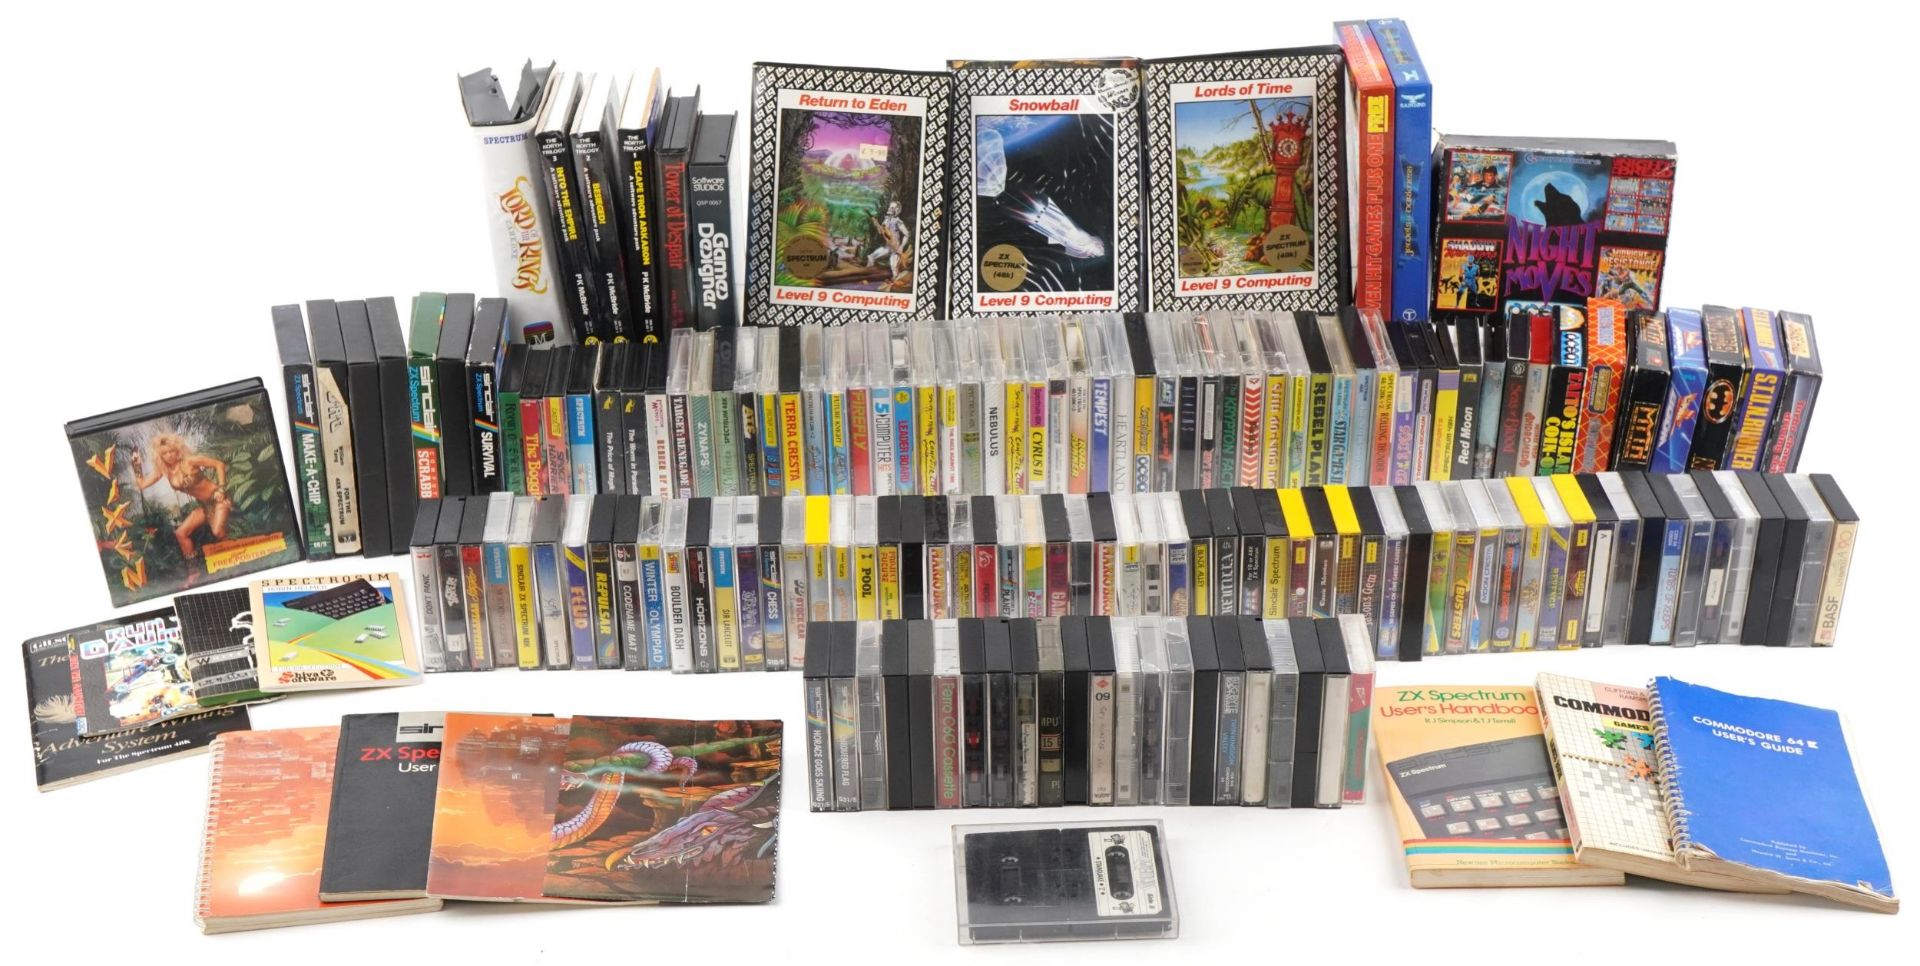 Extensive collection of predominantly vintage Spectrum games, mostly with boxes and cases, including